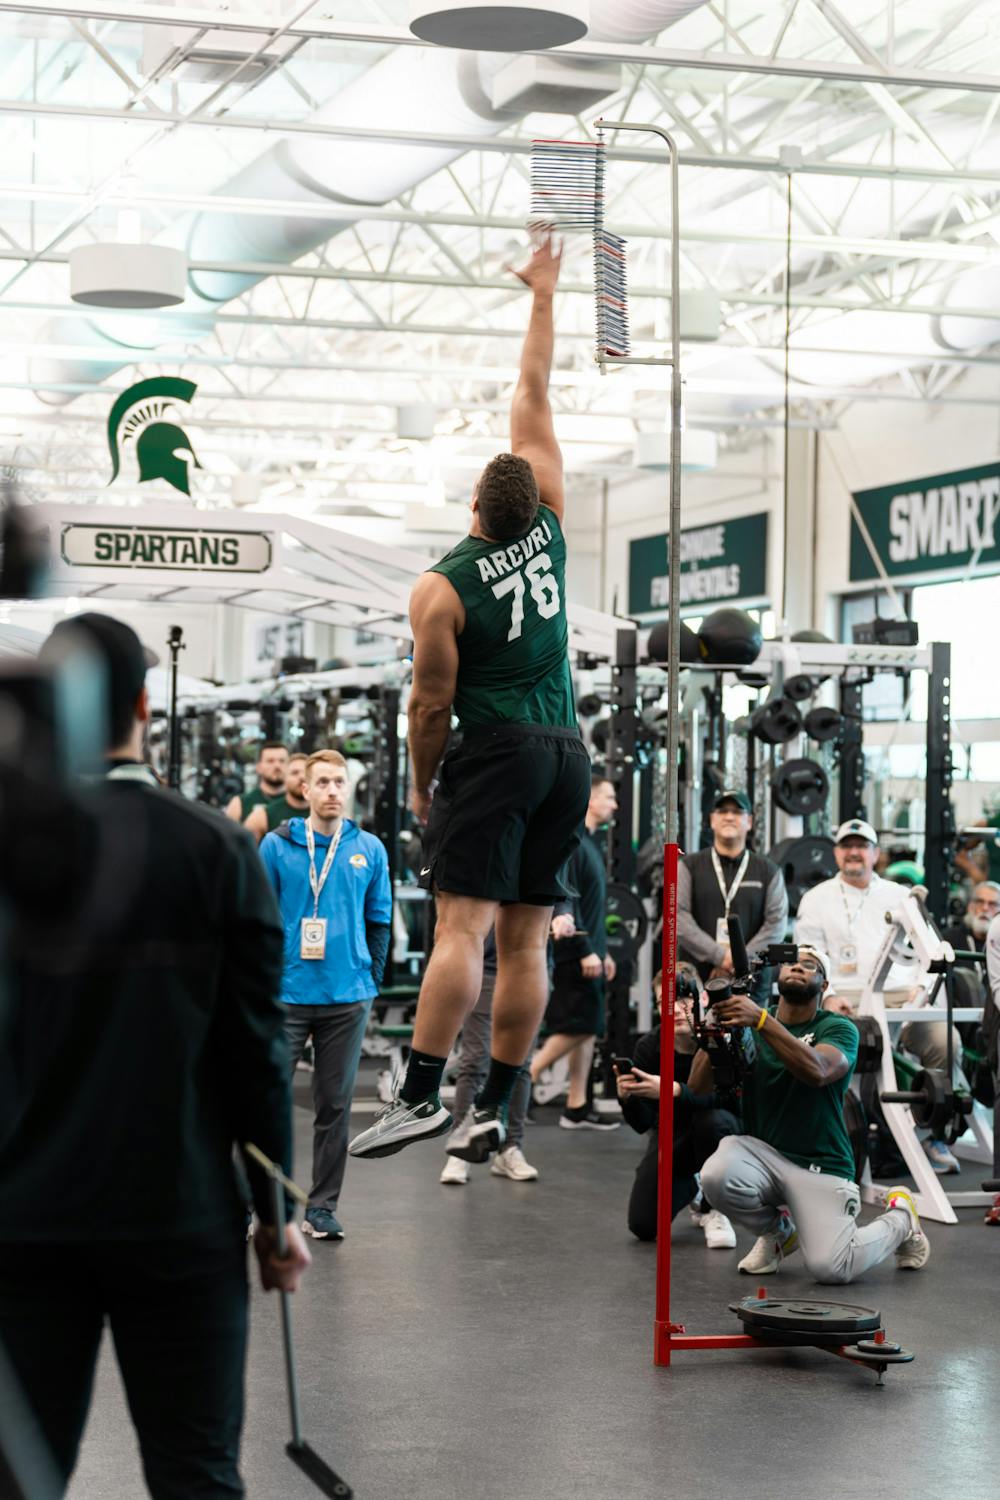 <p>Michigan State graduate student AJ Arcuri with an impressive vertical leap of 33.5 inches, on Mar. 16, 2022 at the Duffy Daugherty Indoor Football Building.</p>